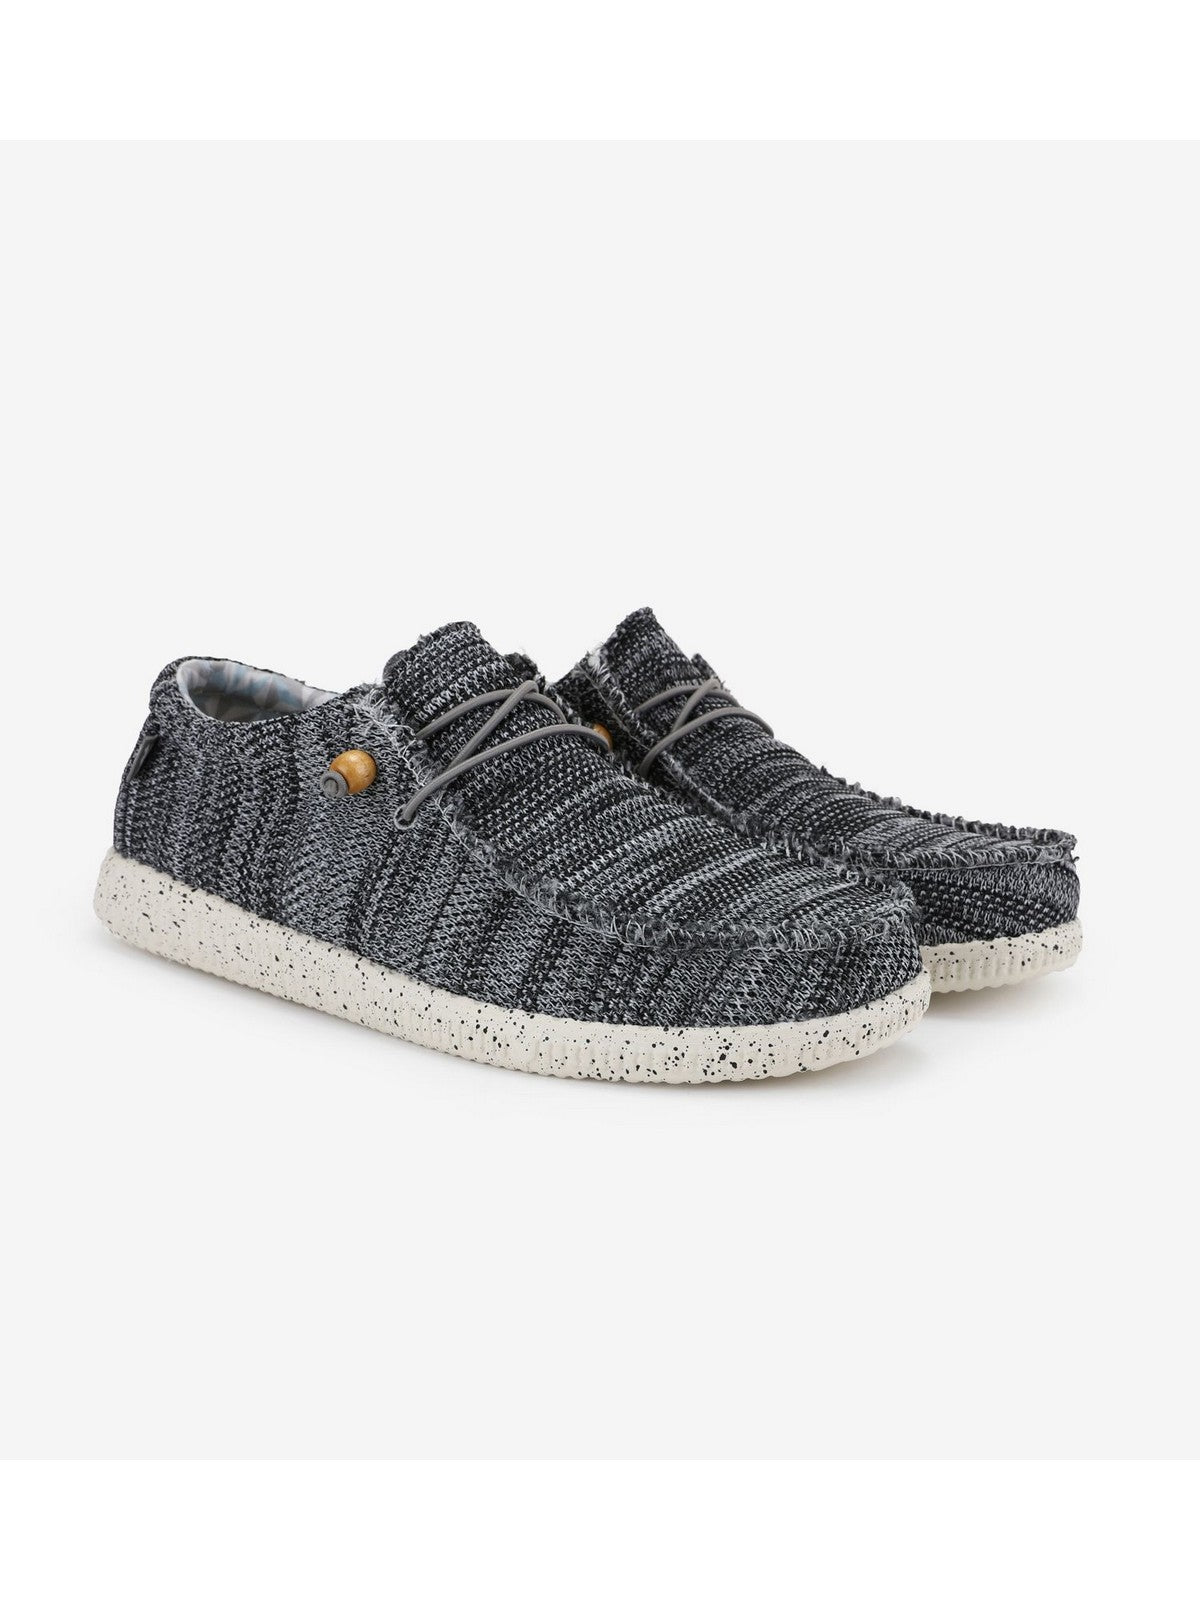 PITAS Mocassin Hommes WP150 W KNITTED GRIS Gris